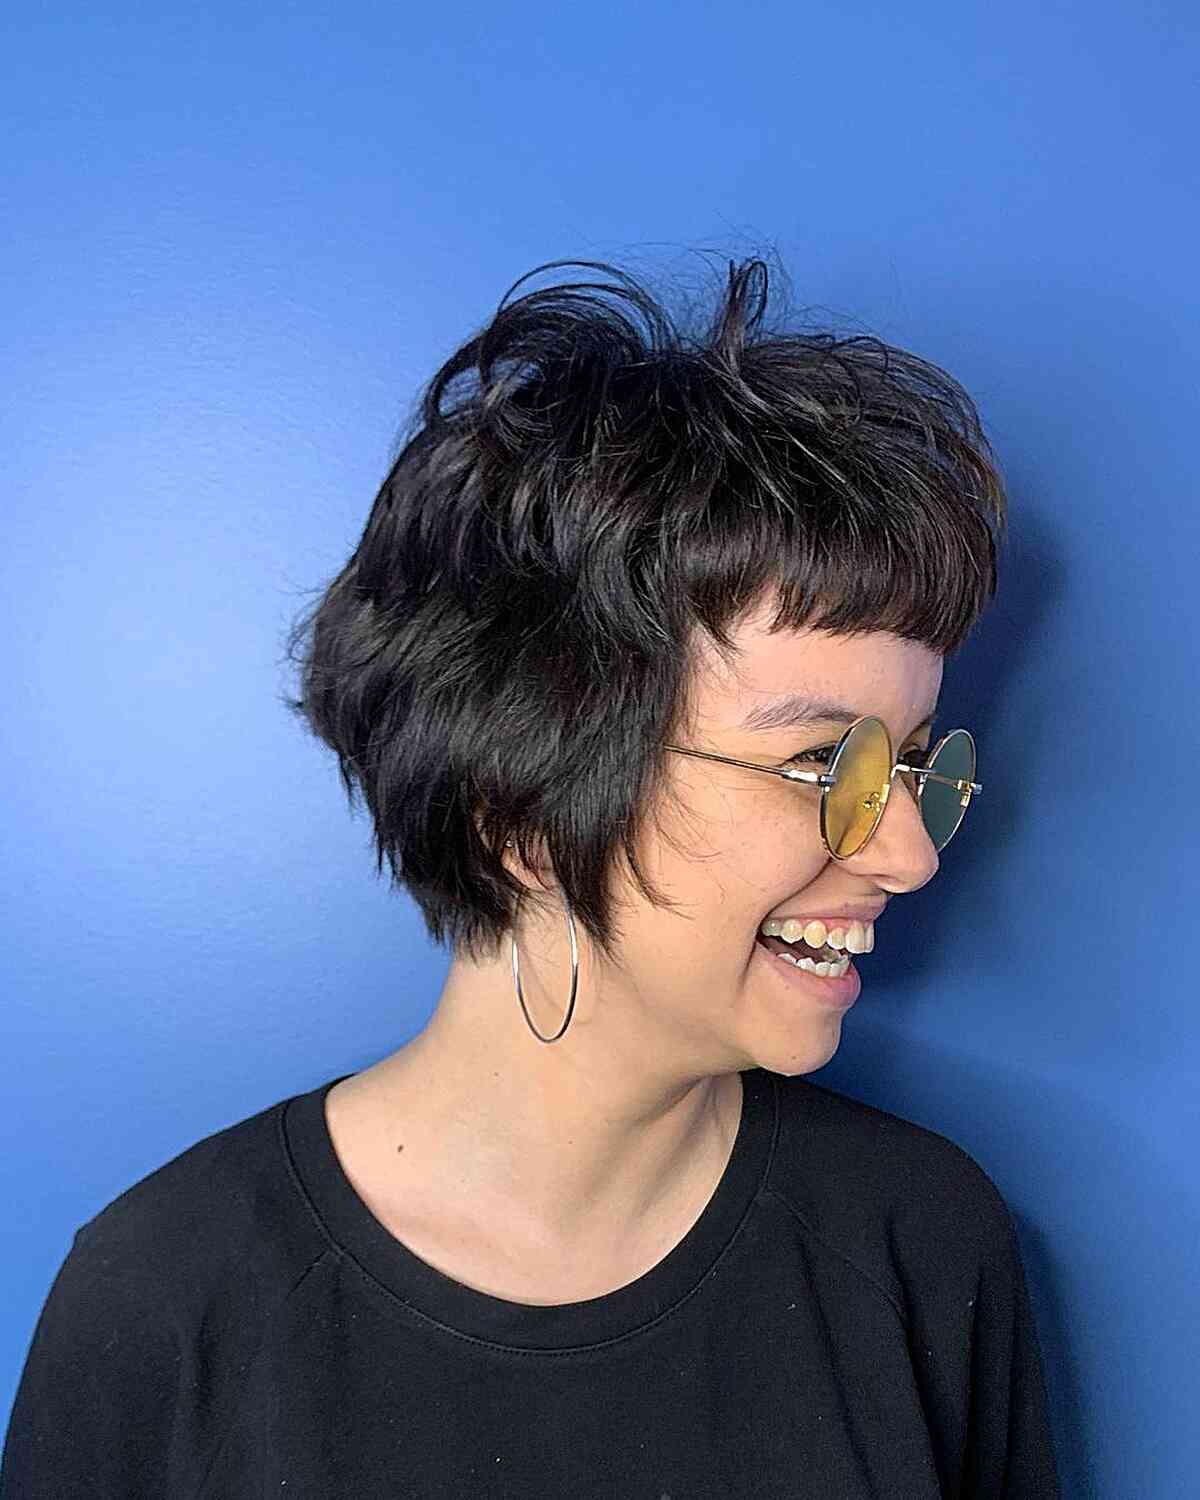 Jaw-Length Short Crop with Choppy Disconnected Layers and Short Bangs for Dark Hair